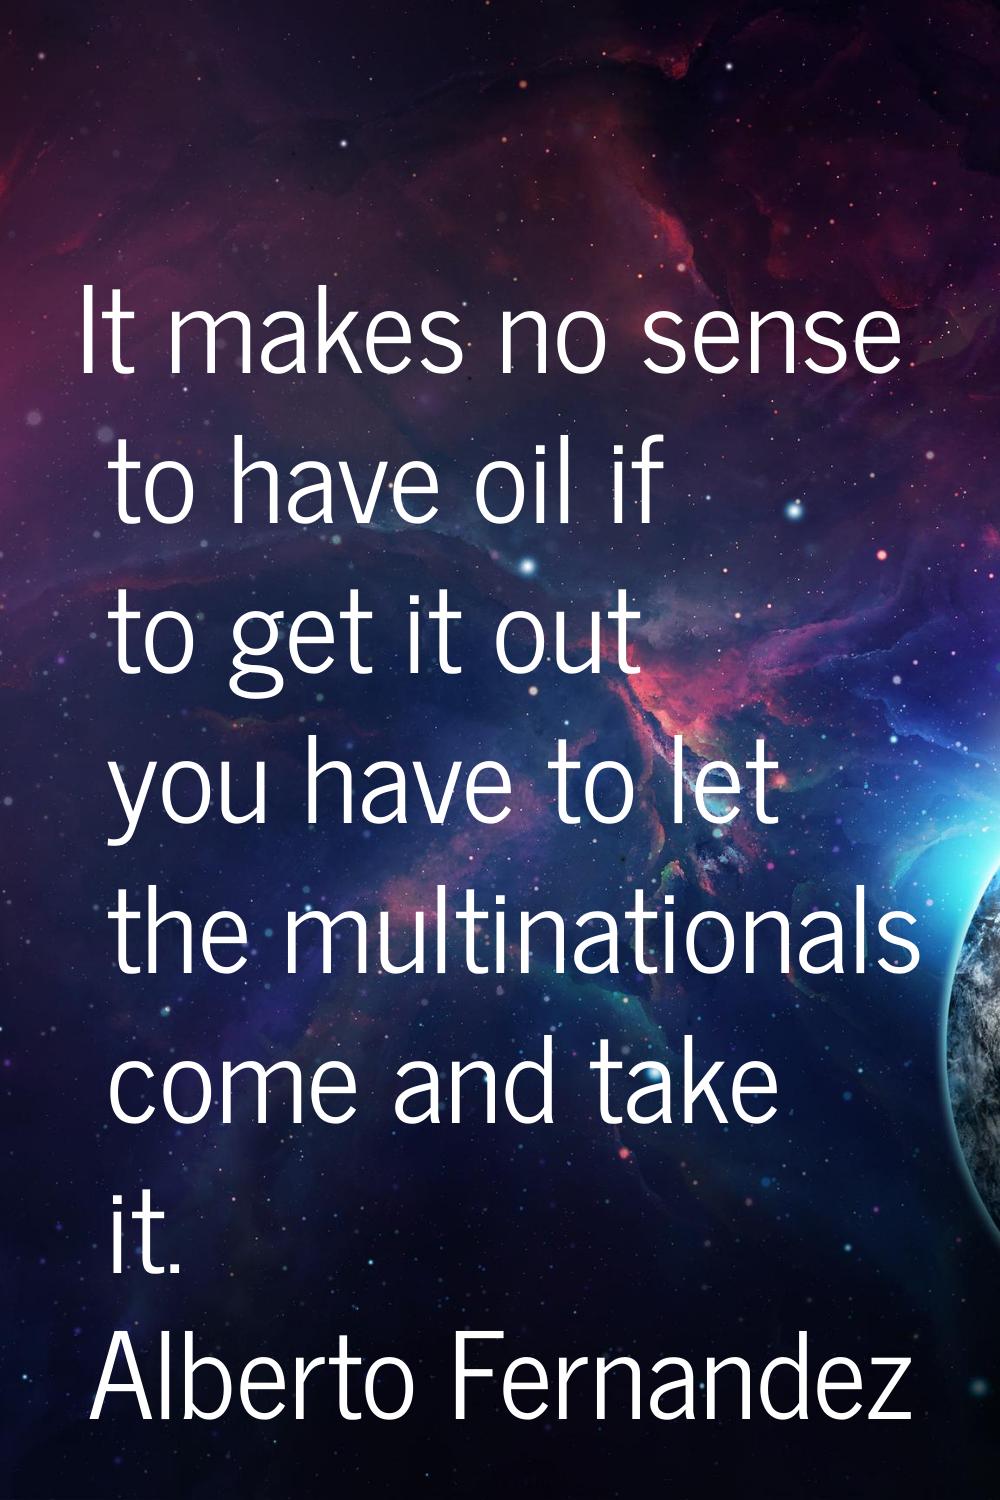 It makes no sense to have oil if to get it out you have to let the multinationals come and take it.